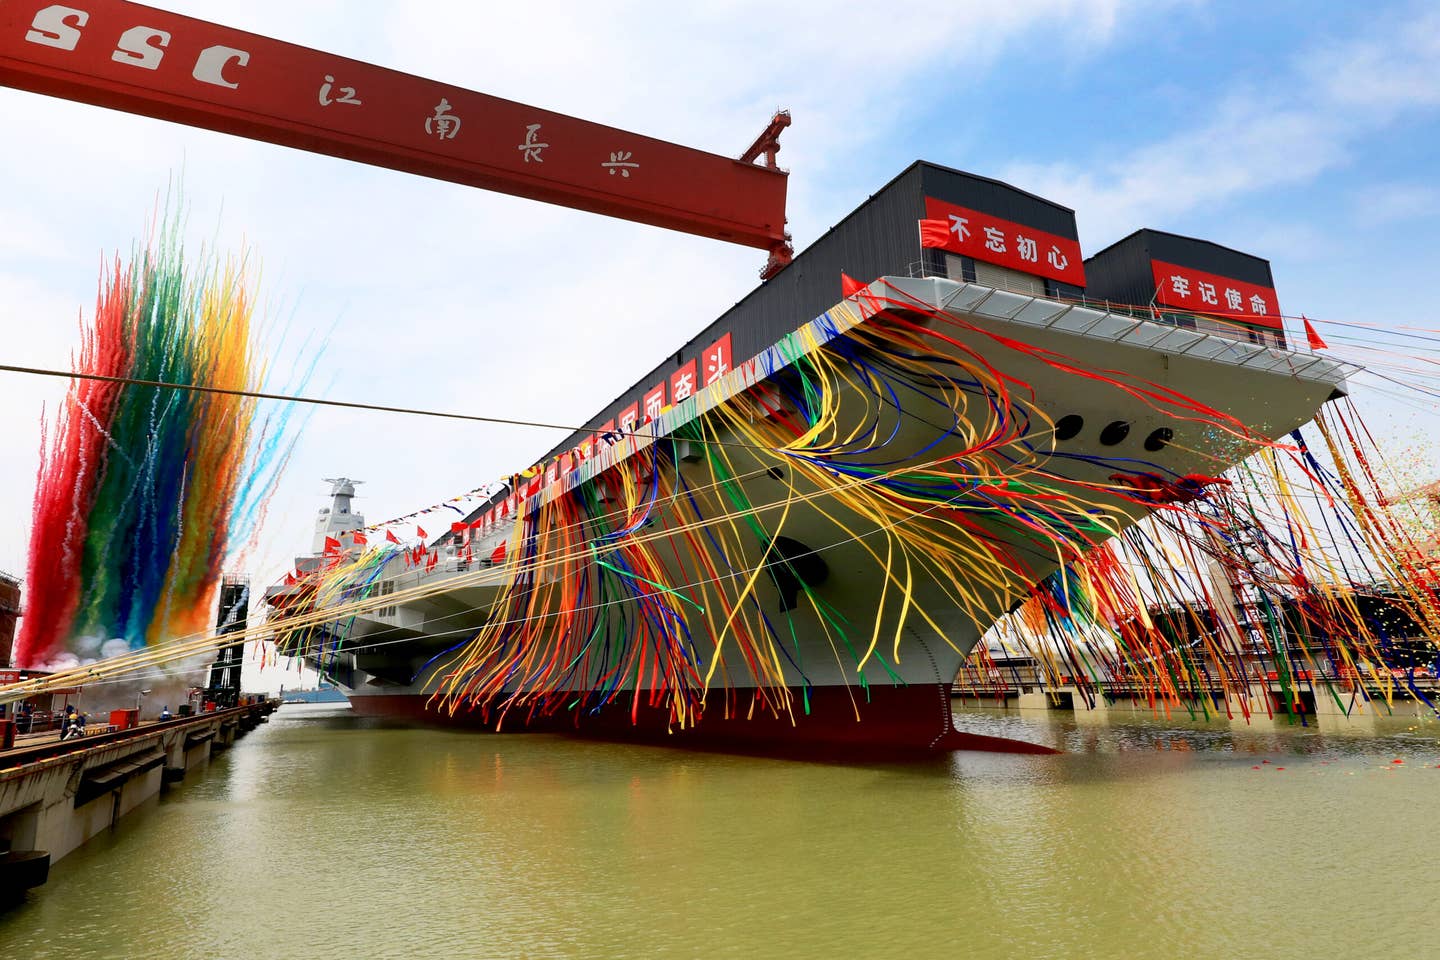 The launching ceremony of the third Chinese aircraft carrier, th<em>e Fujian, at Jiangnan Shipyard, on June 17, 2022, in Shanghai, China. </em>Photo by VCG/VCG via Getty Images